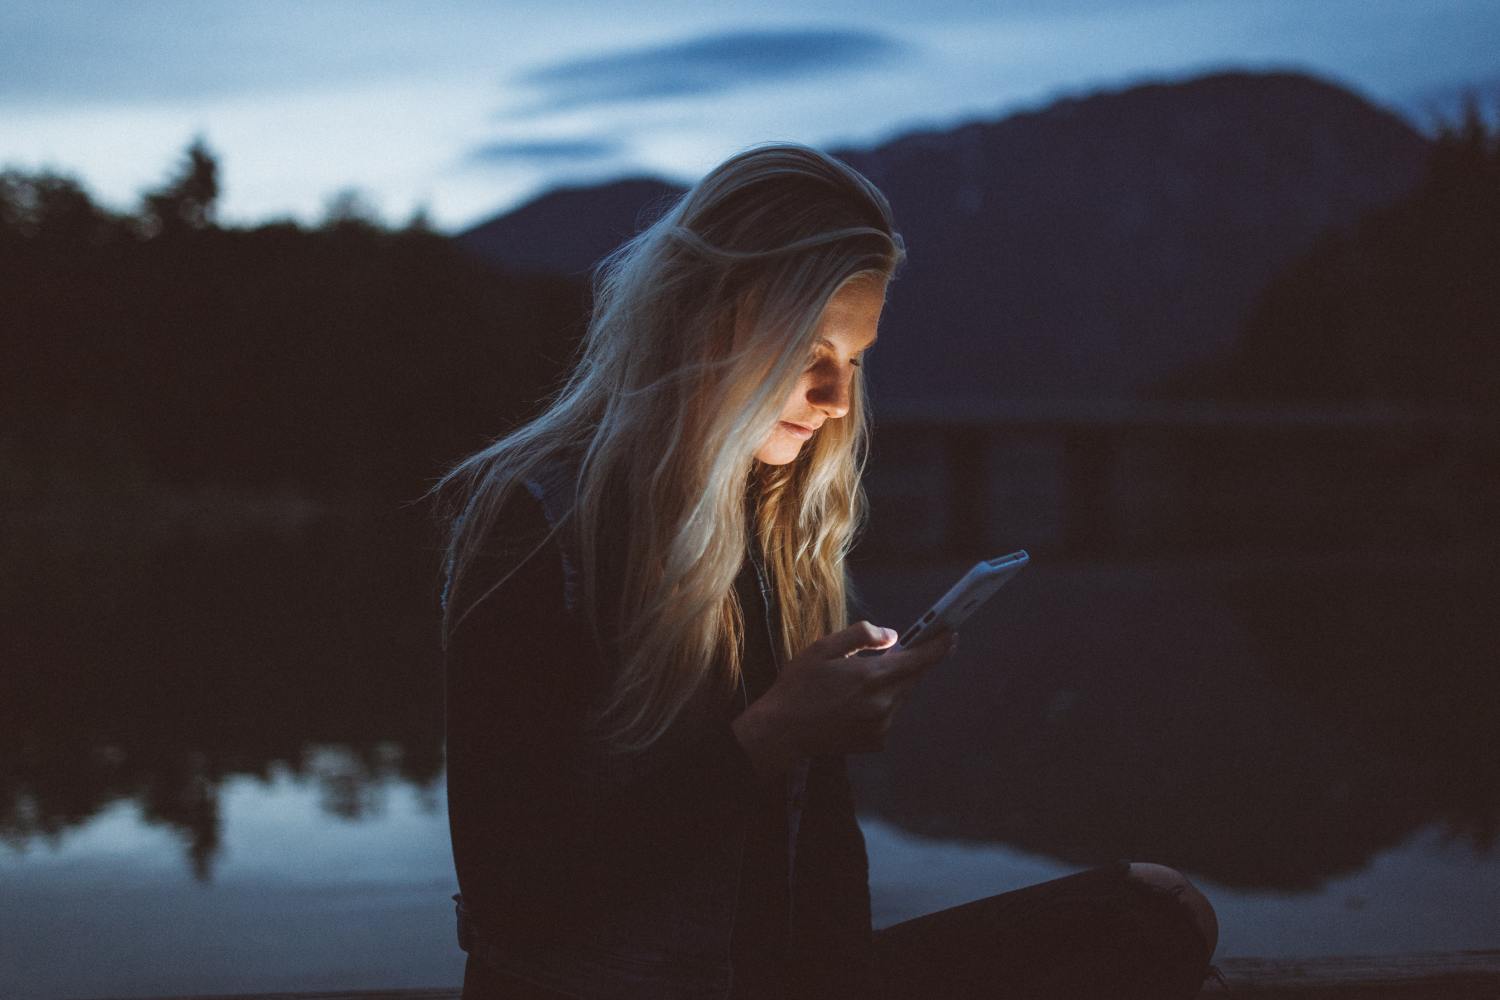 82 Cute Text Messages To Send Your Crush To Keep Them Interested